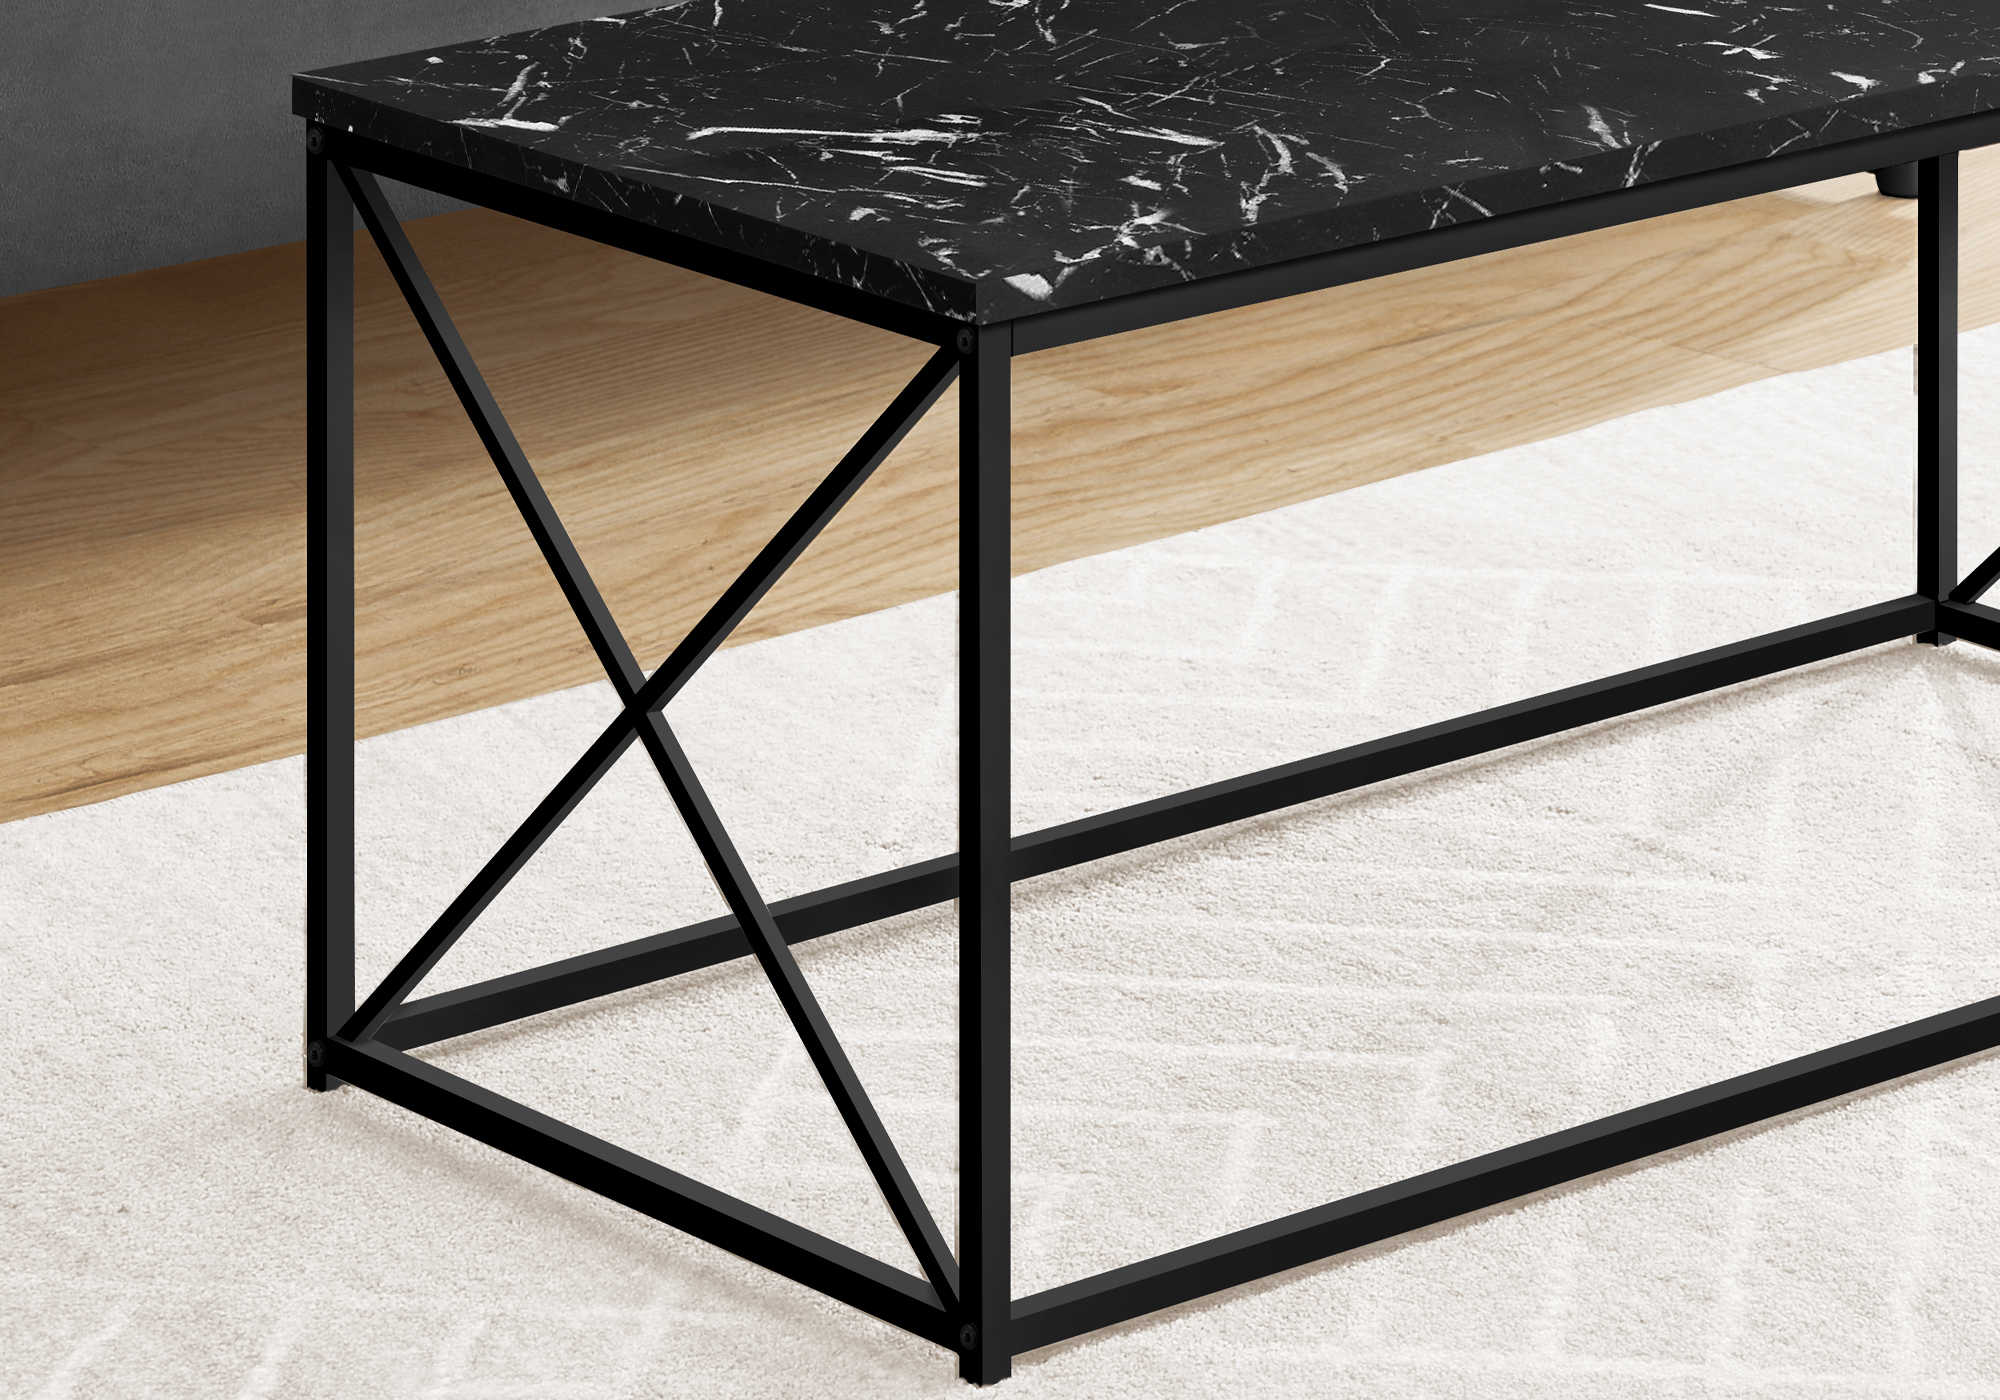 I 3783 - COFFEE TABLE - 40"L / BLACK MARBLE / BLACK METAL BY MONARCH SPECIALTIES INC